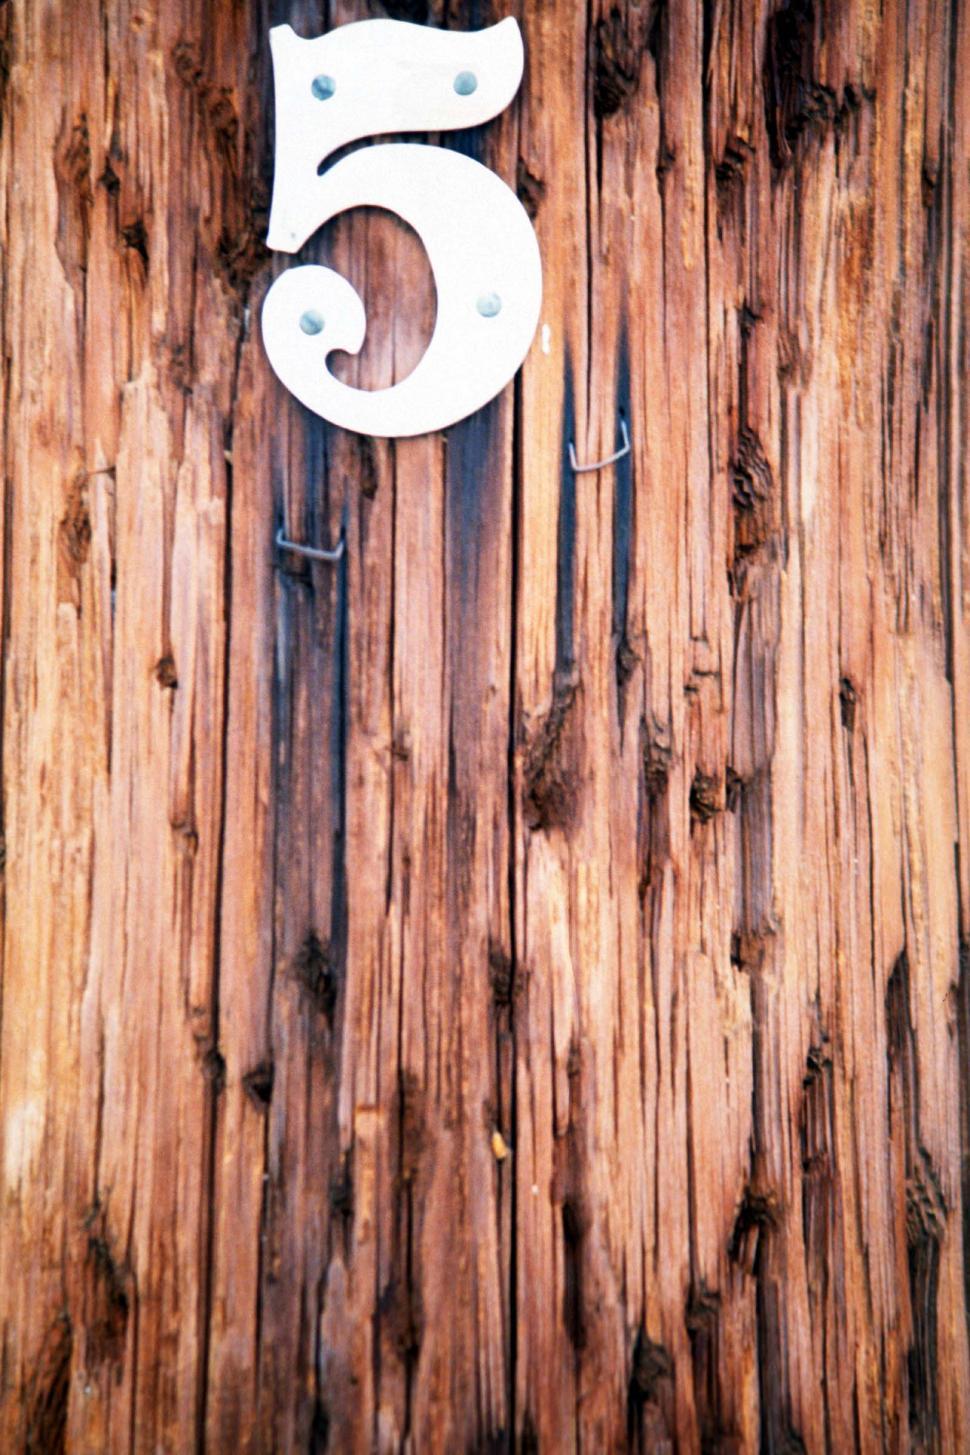 Free Image of numbers five telephone pole staples holes worn weathered texture grain wooden 